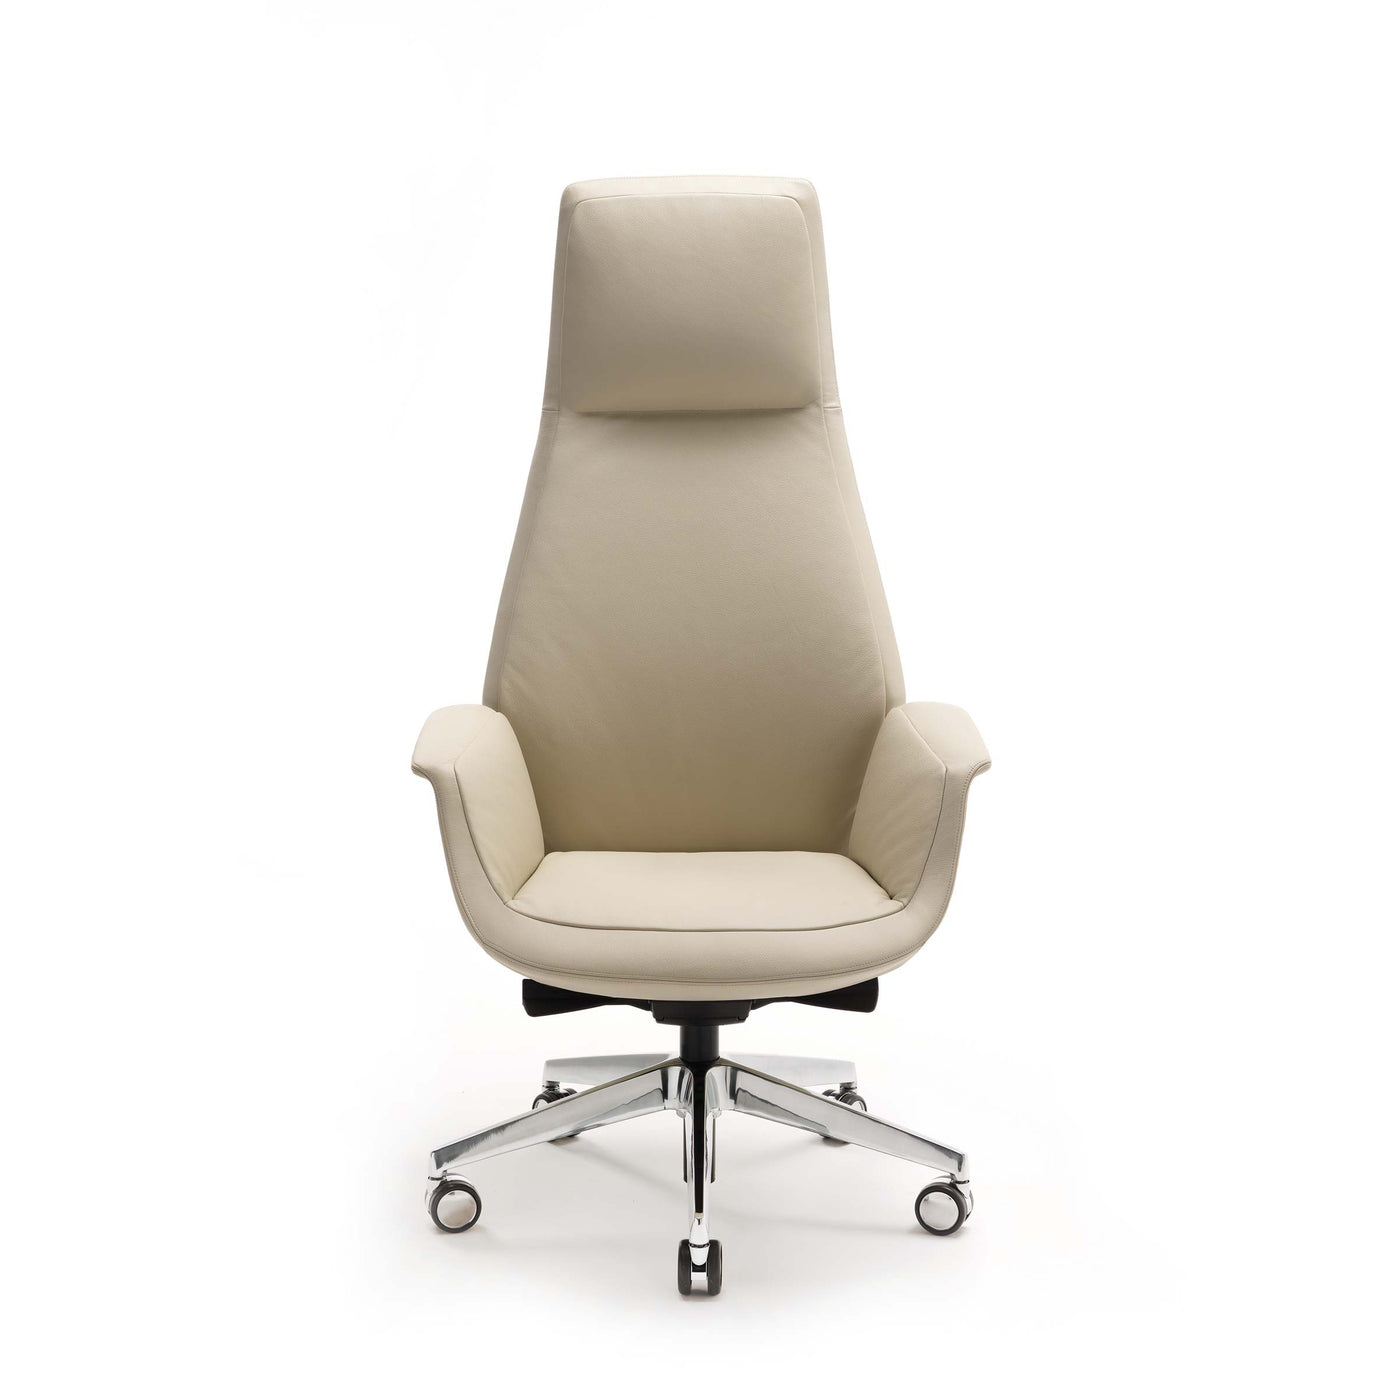 High Back Swivel Chair with Wheels DOWNTOWN PRESIDENT by Jean-Marie Massaud for Poltrona Frau 11